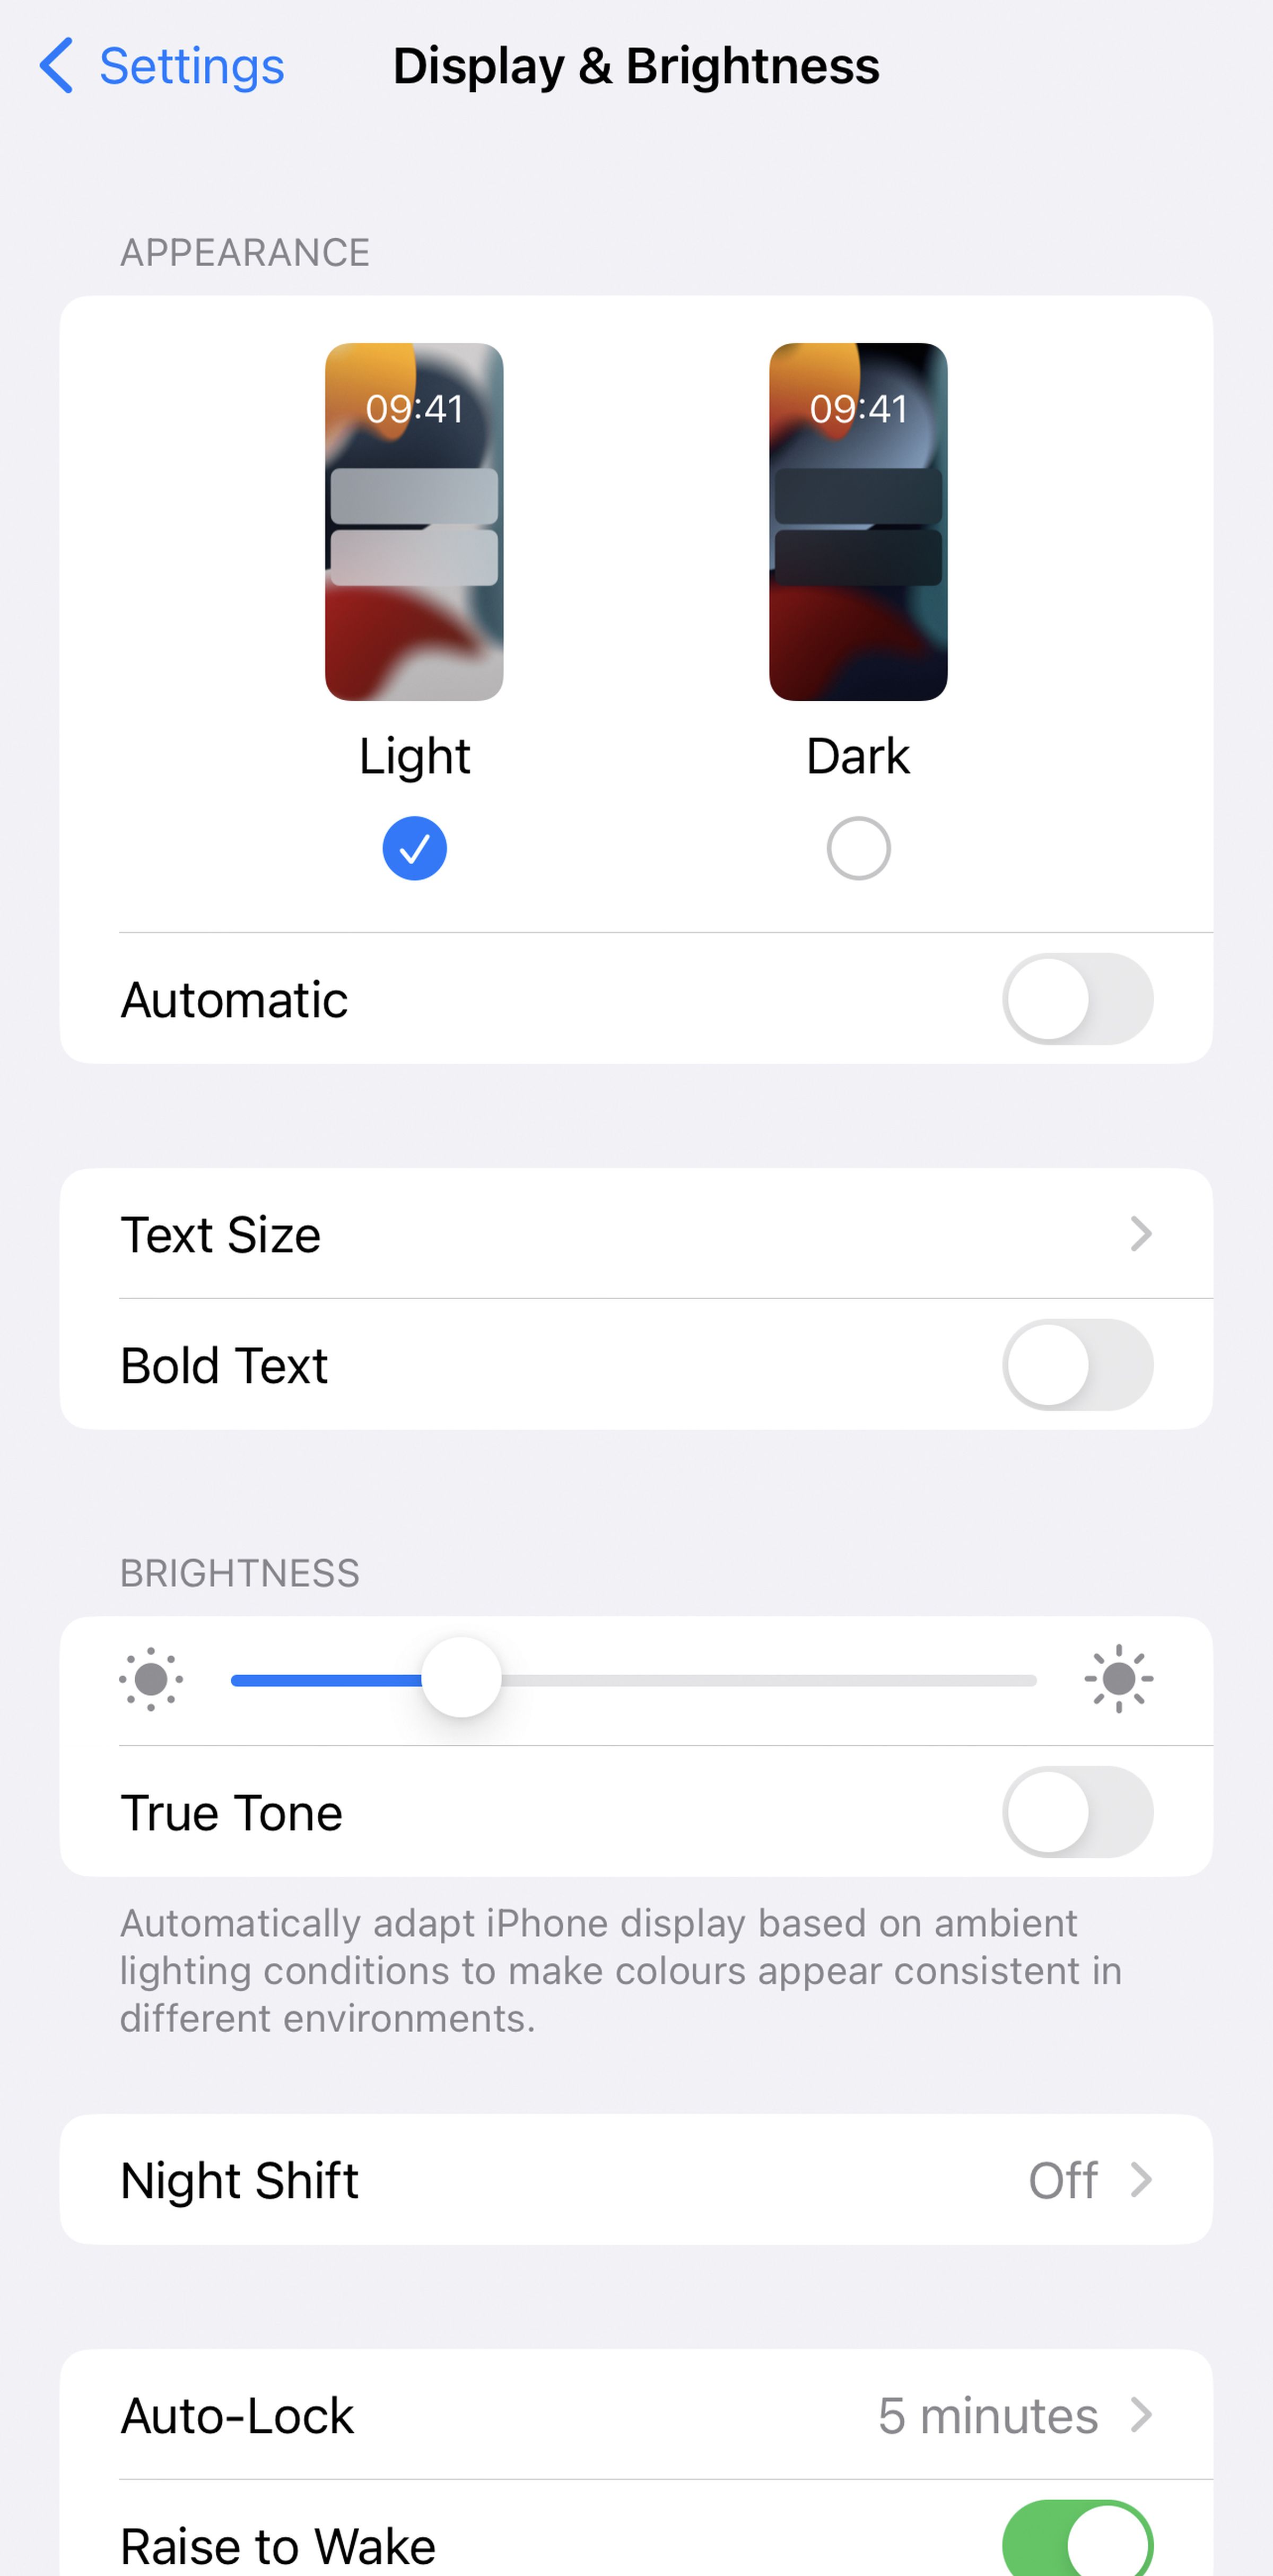 Display &amp; Brightness page with images show a light and dark screen, light chosen, then several other options including text size and bold text.